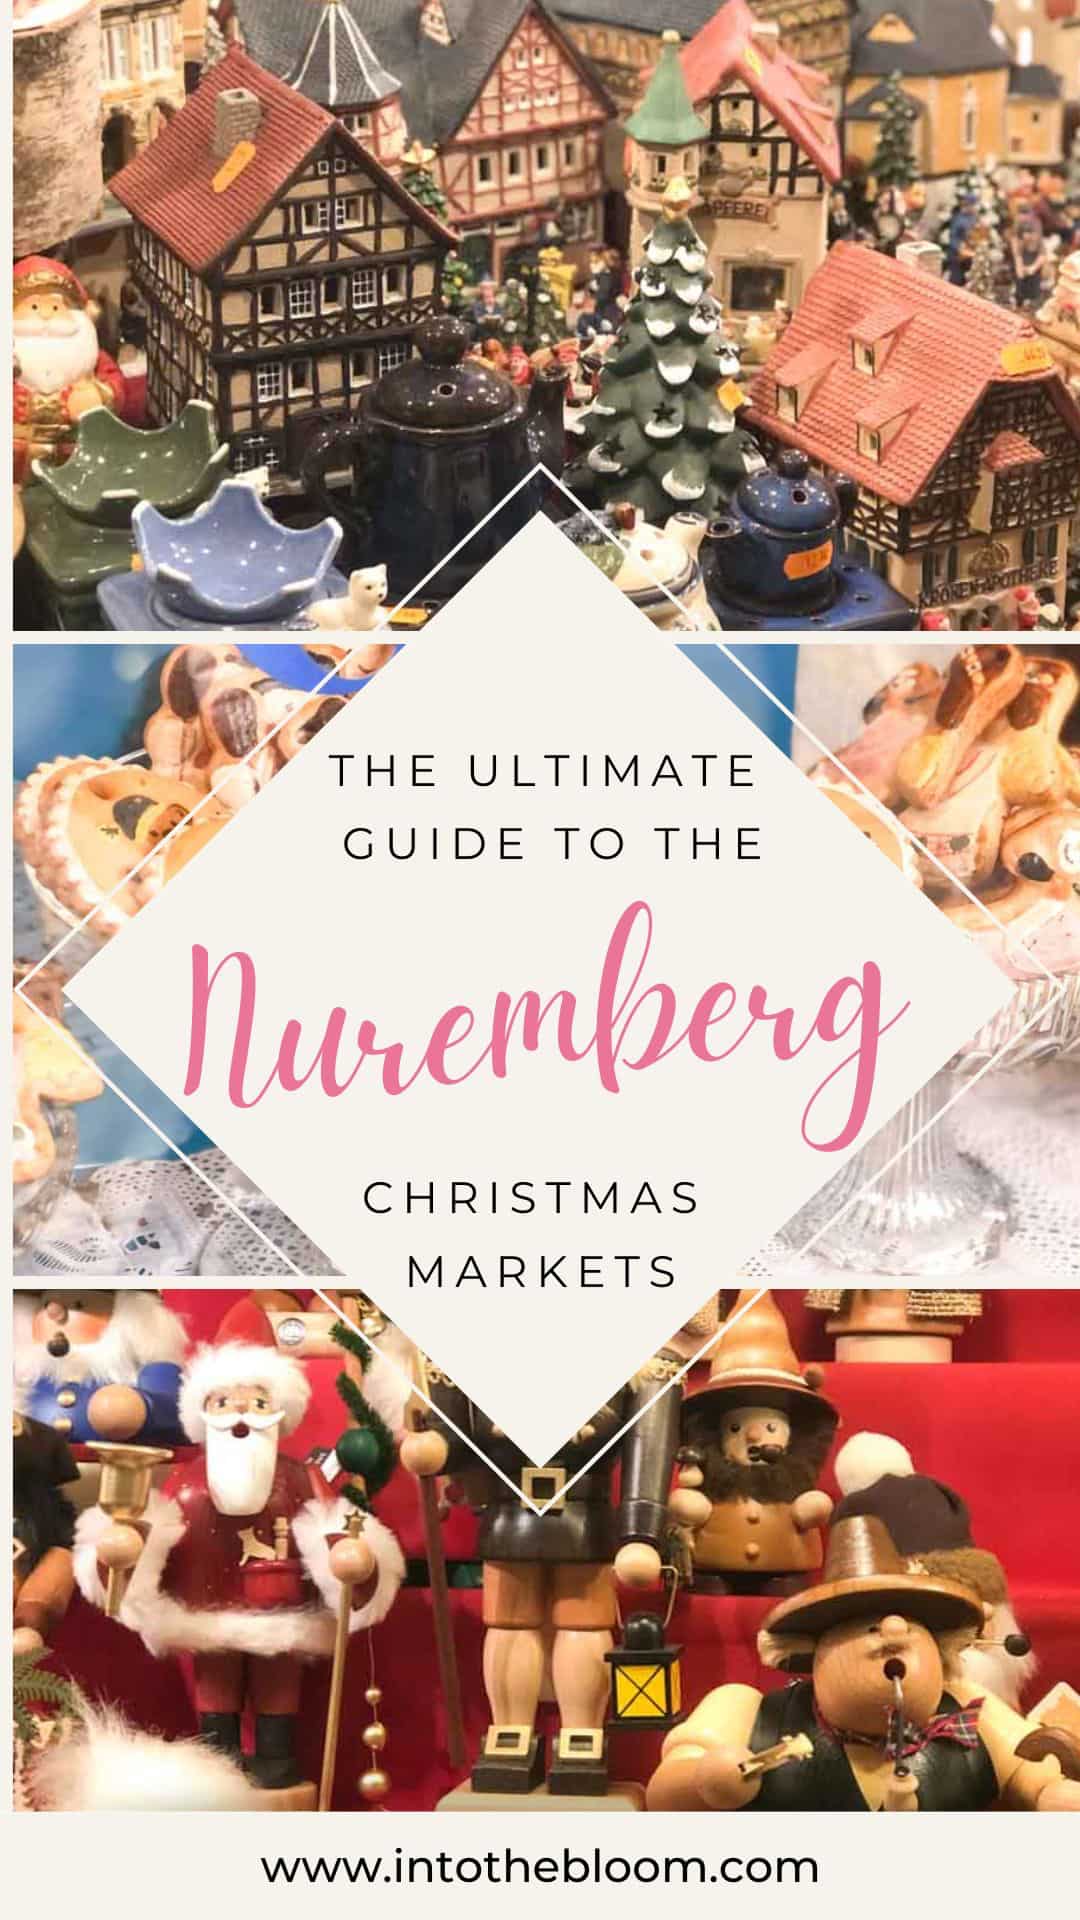 What to see, eat, and buy at the Nuremberg Christmas Markets - The ultimate guide